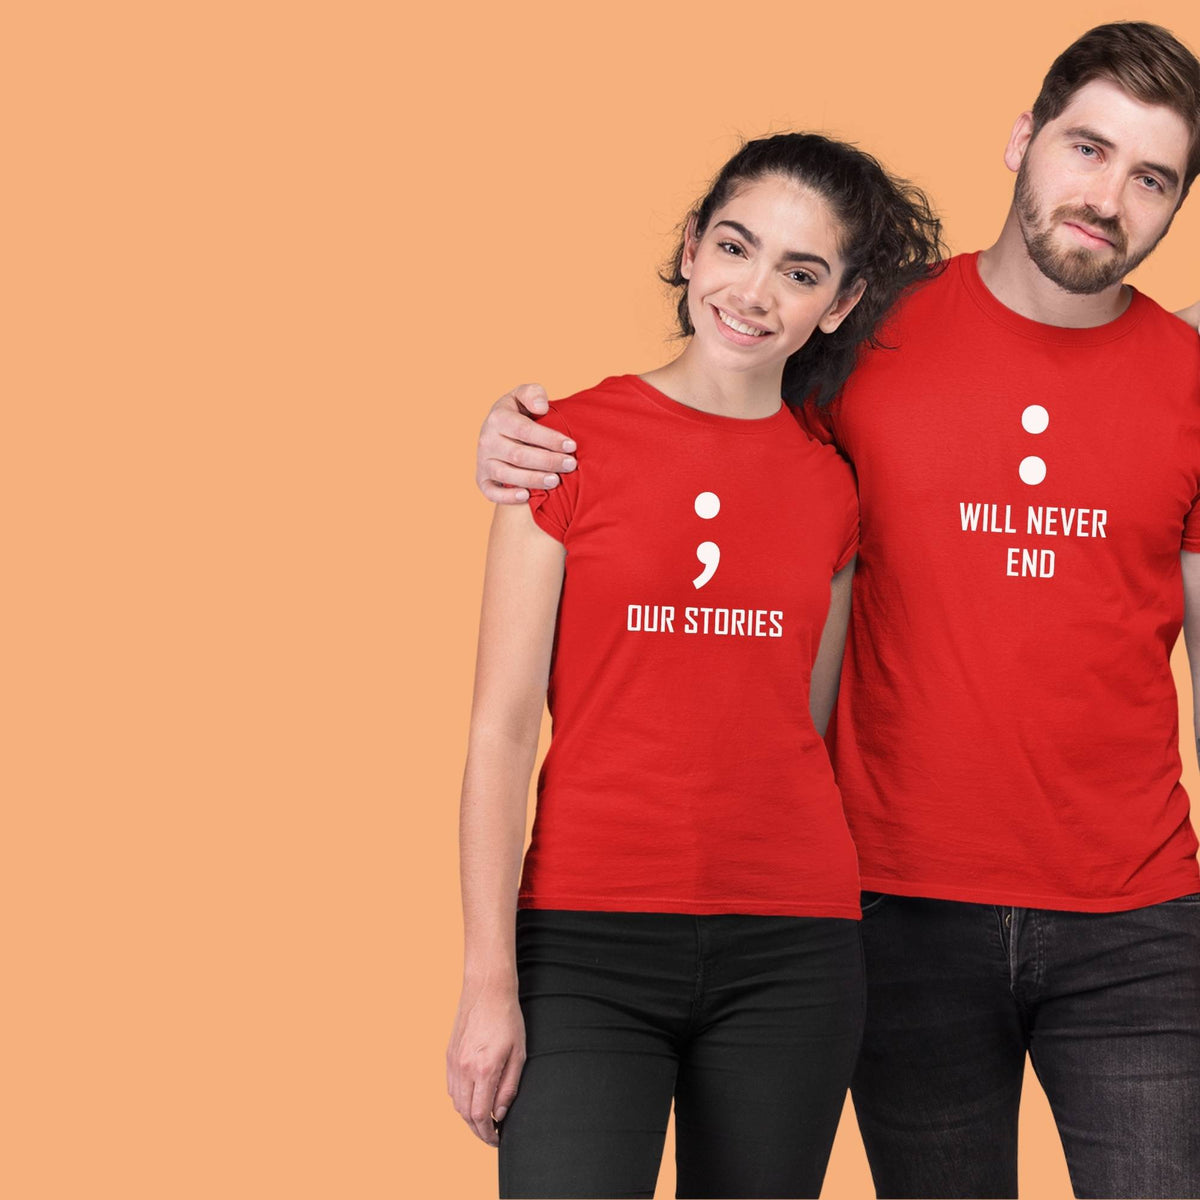 our-stories-will-never-end-printed-couple-t-shirt-cotton-red-color-premium-quality-gogirgit-model